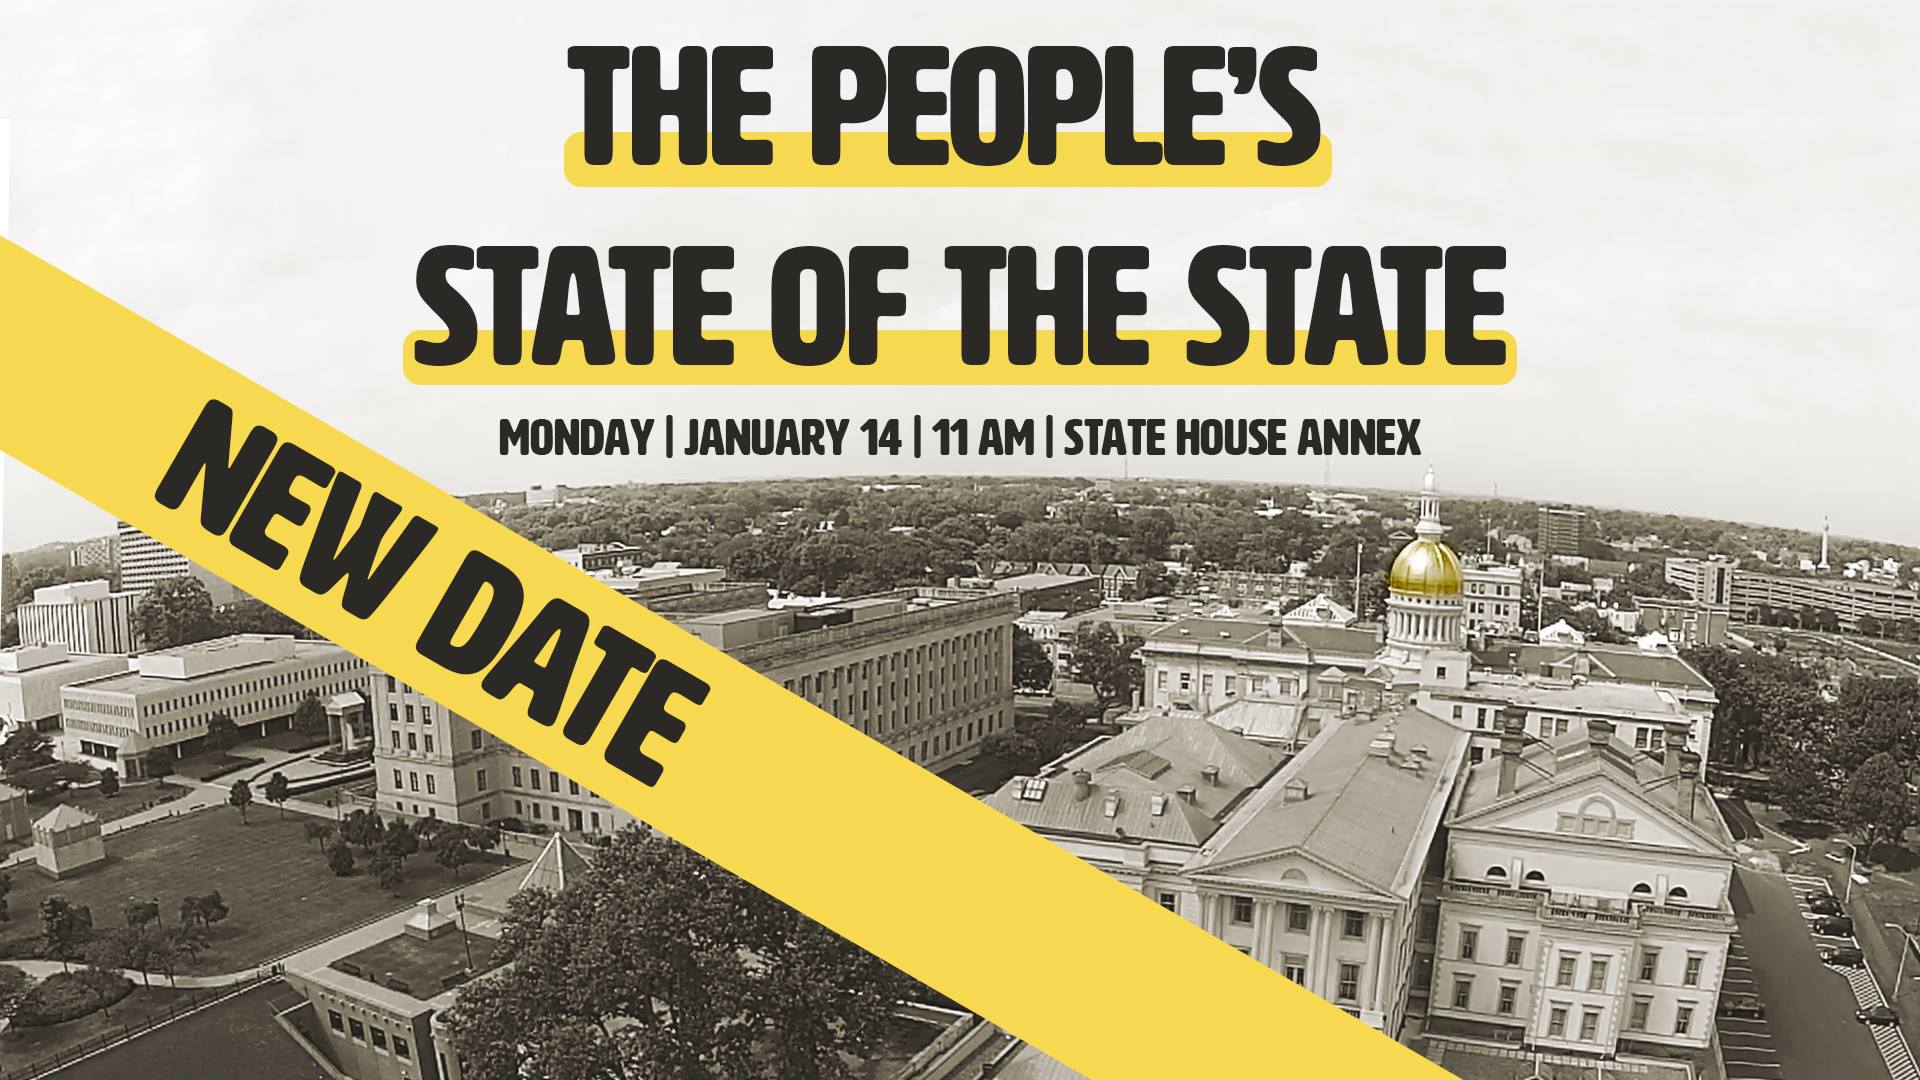 nj_peoples state of the state image_facebook event.jpg